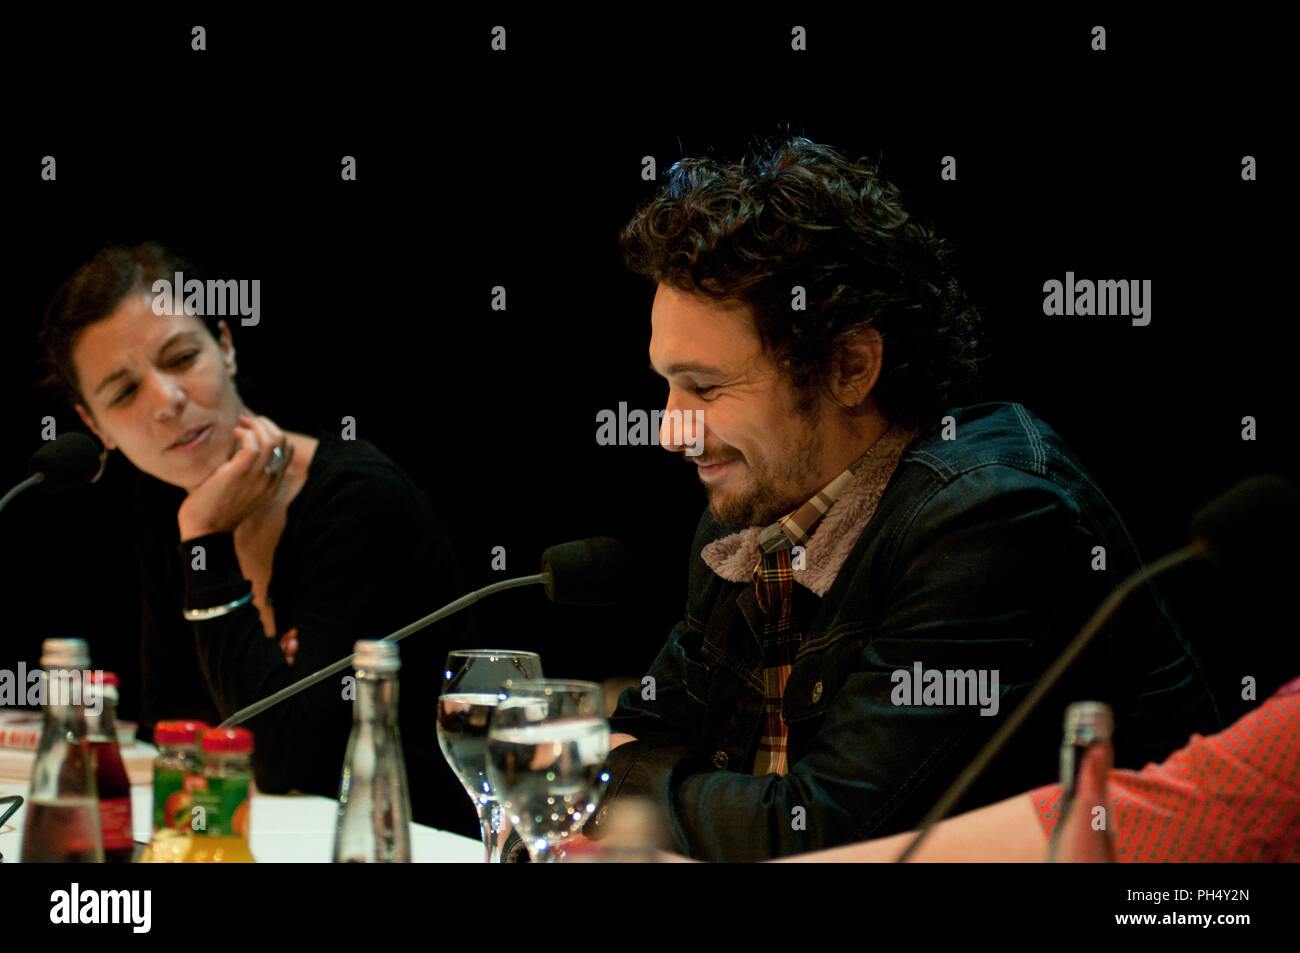 Actor James Franco seen at Filmfest München 2012 Stock Photo